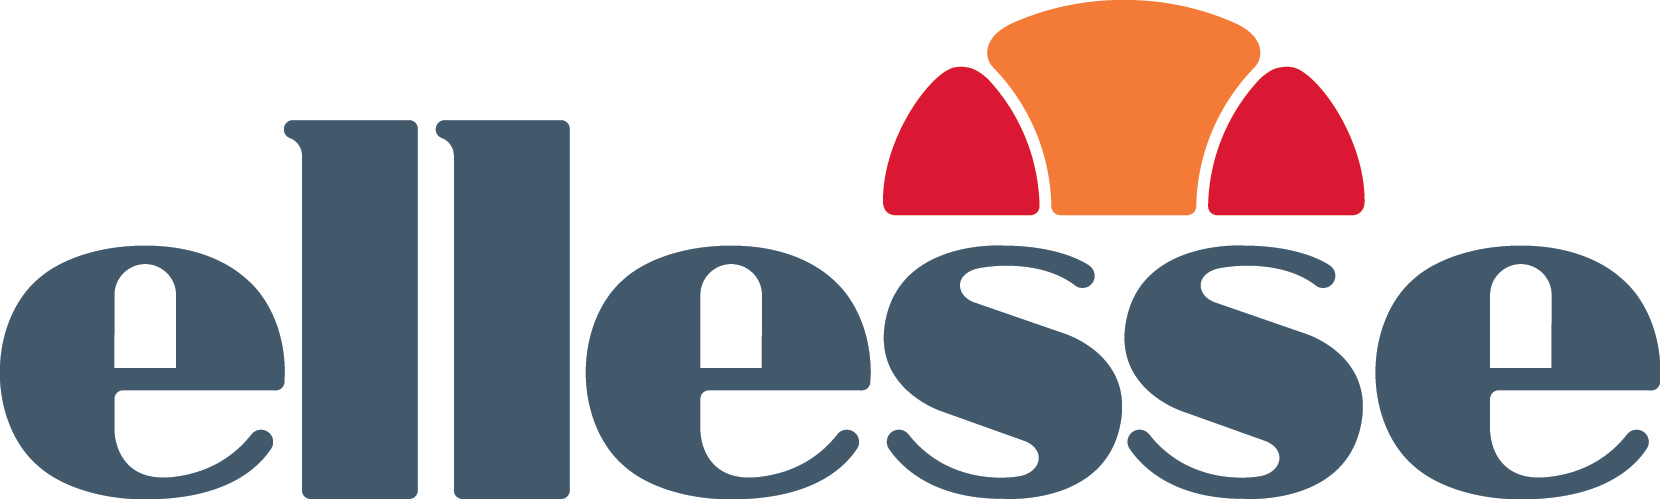 Italian Sports Apparel Logo - I almost forgot about ellesse, one of my teachers had the logo